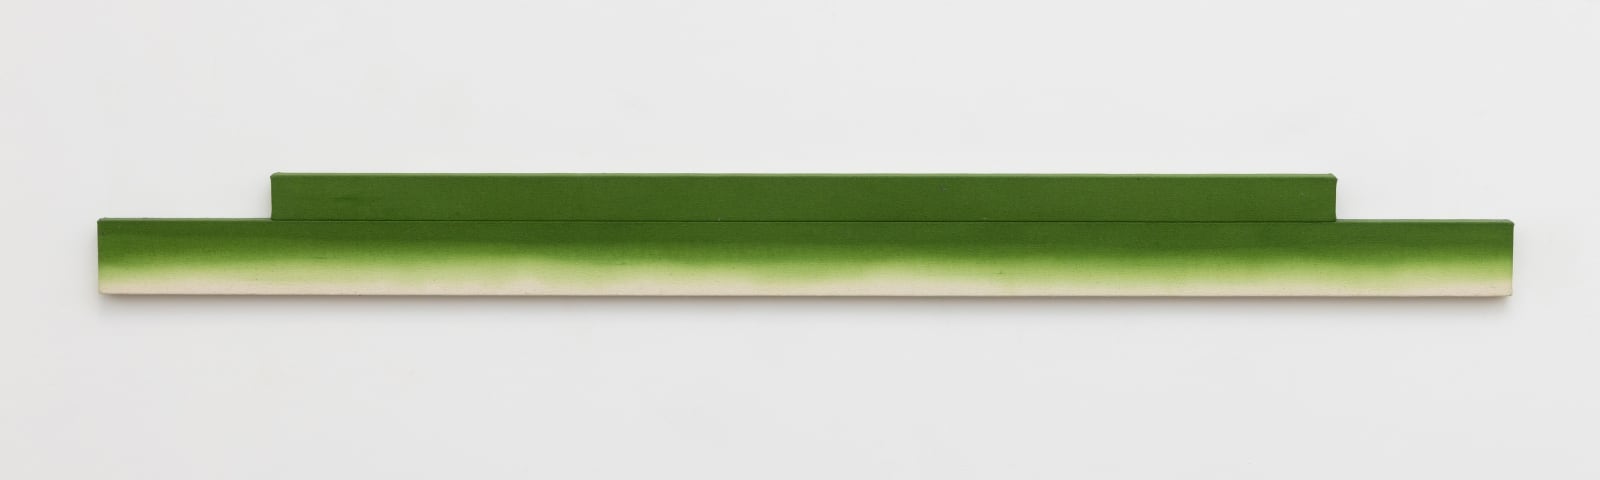 Horizontal shaped canvas painting stretched on two wooden bars varying in length and colors of grassy green and cream.